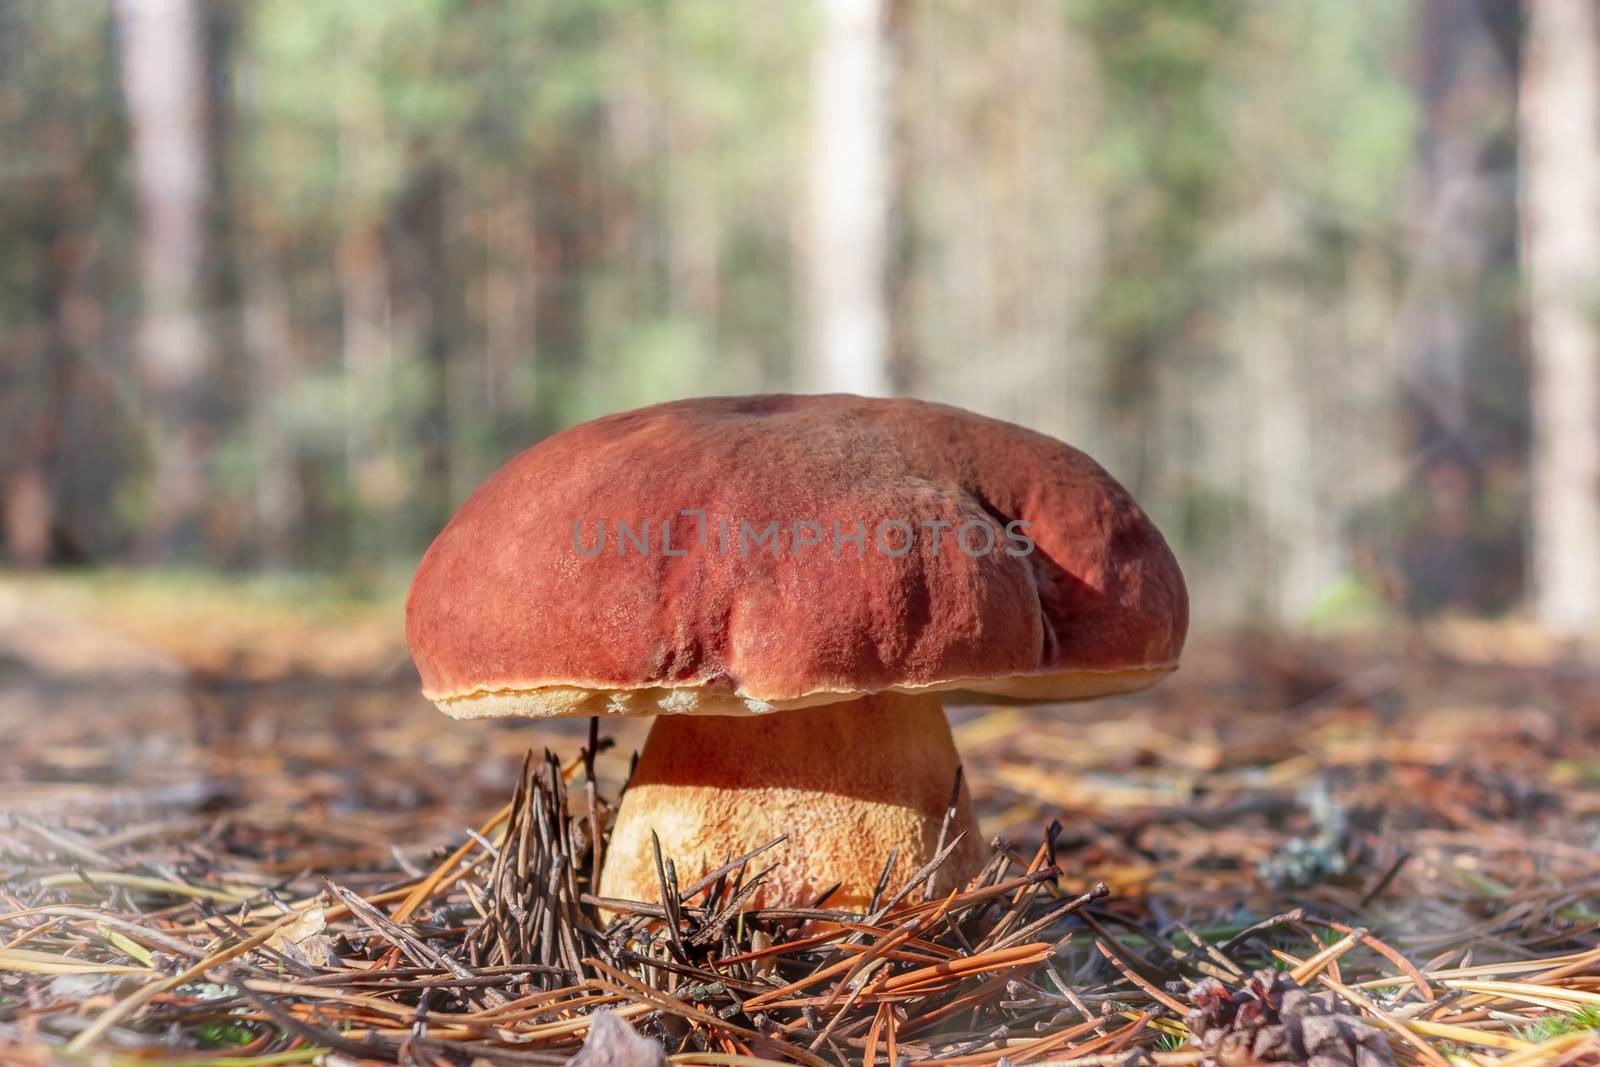 Big edible boletus edulis mushroom, known as a penny bun or king bolete growing in a pine forest - image by galsand